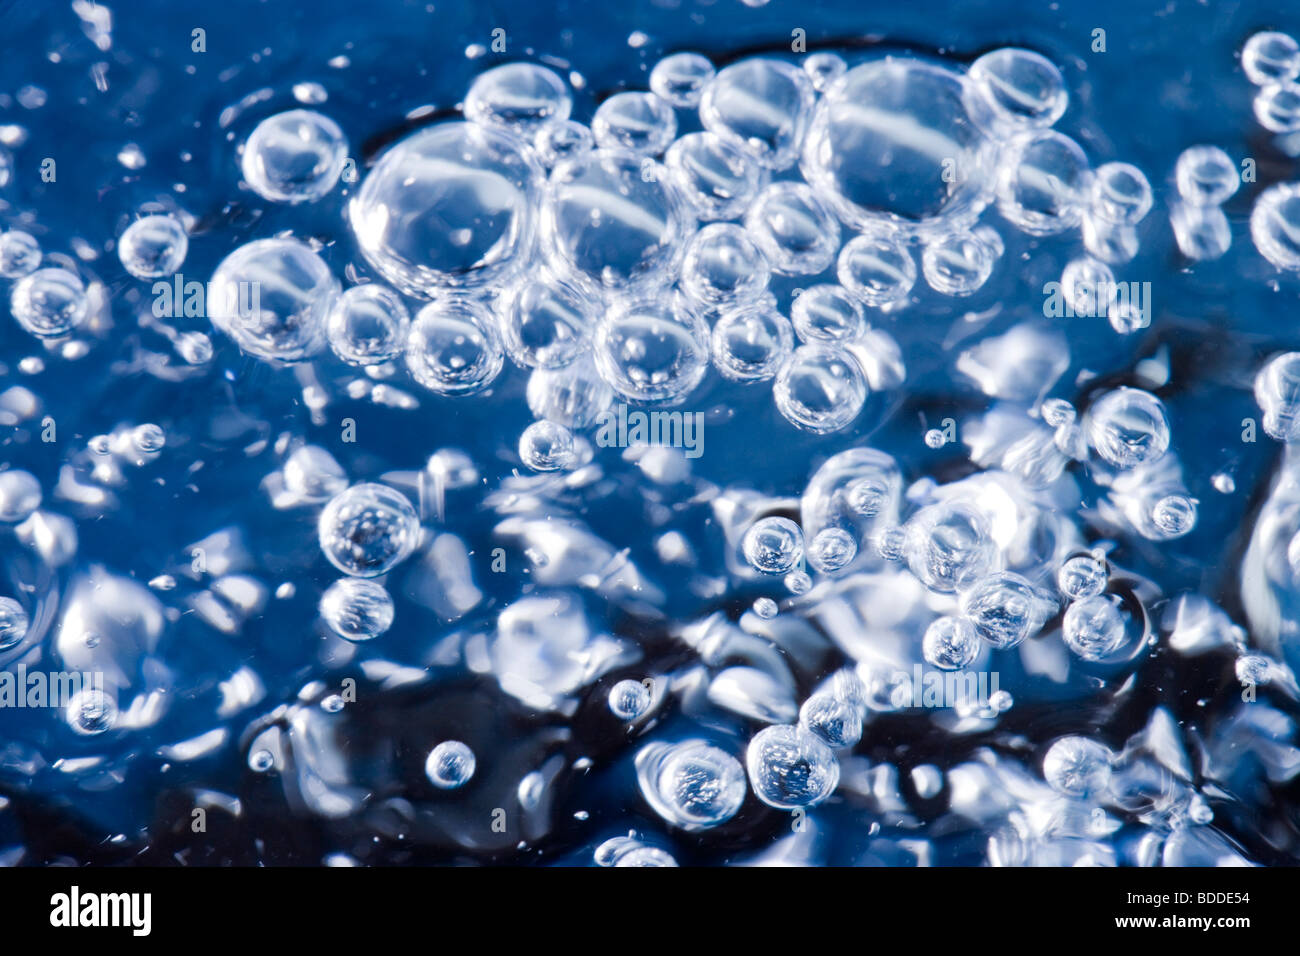 Bubbles on water surface Stock Photo